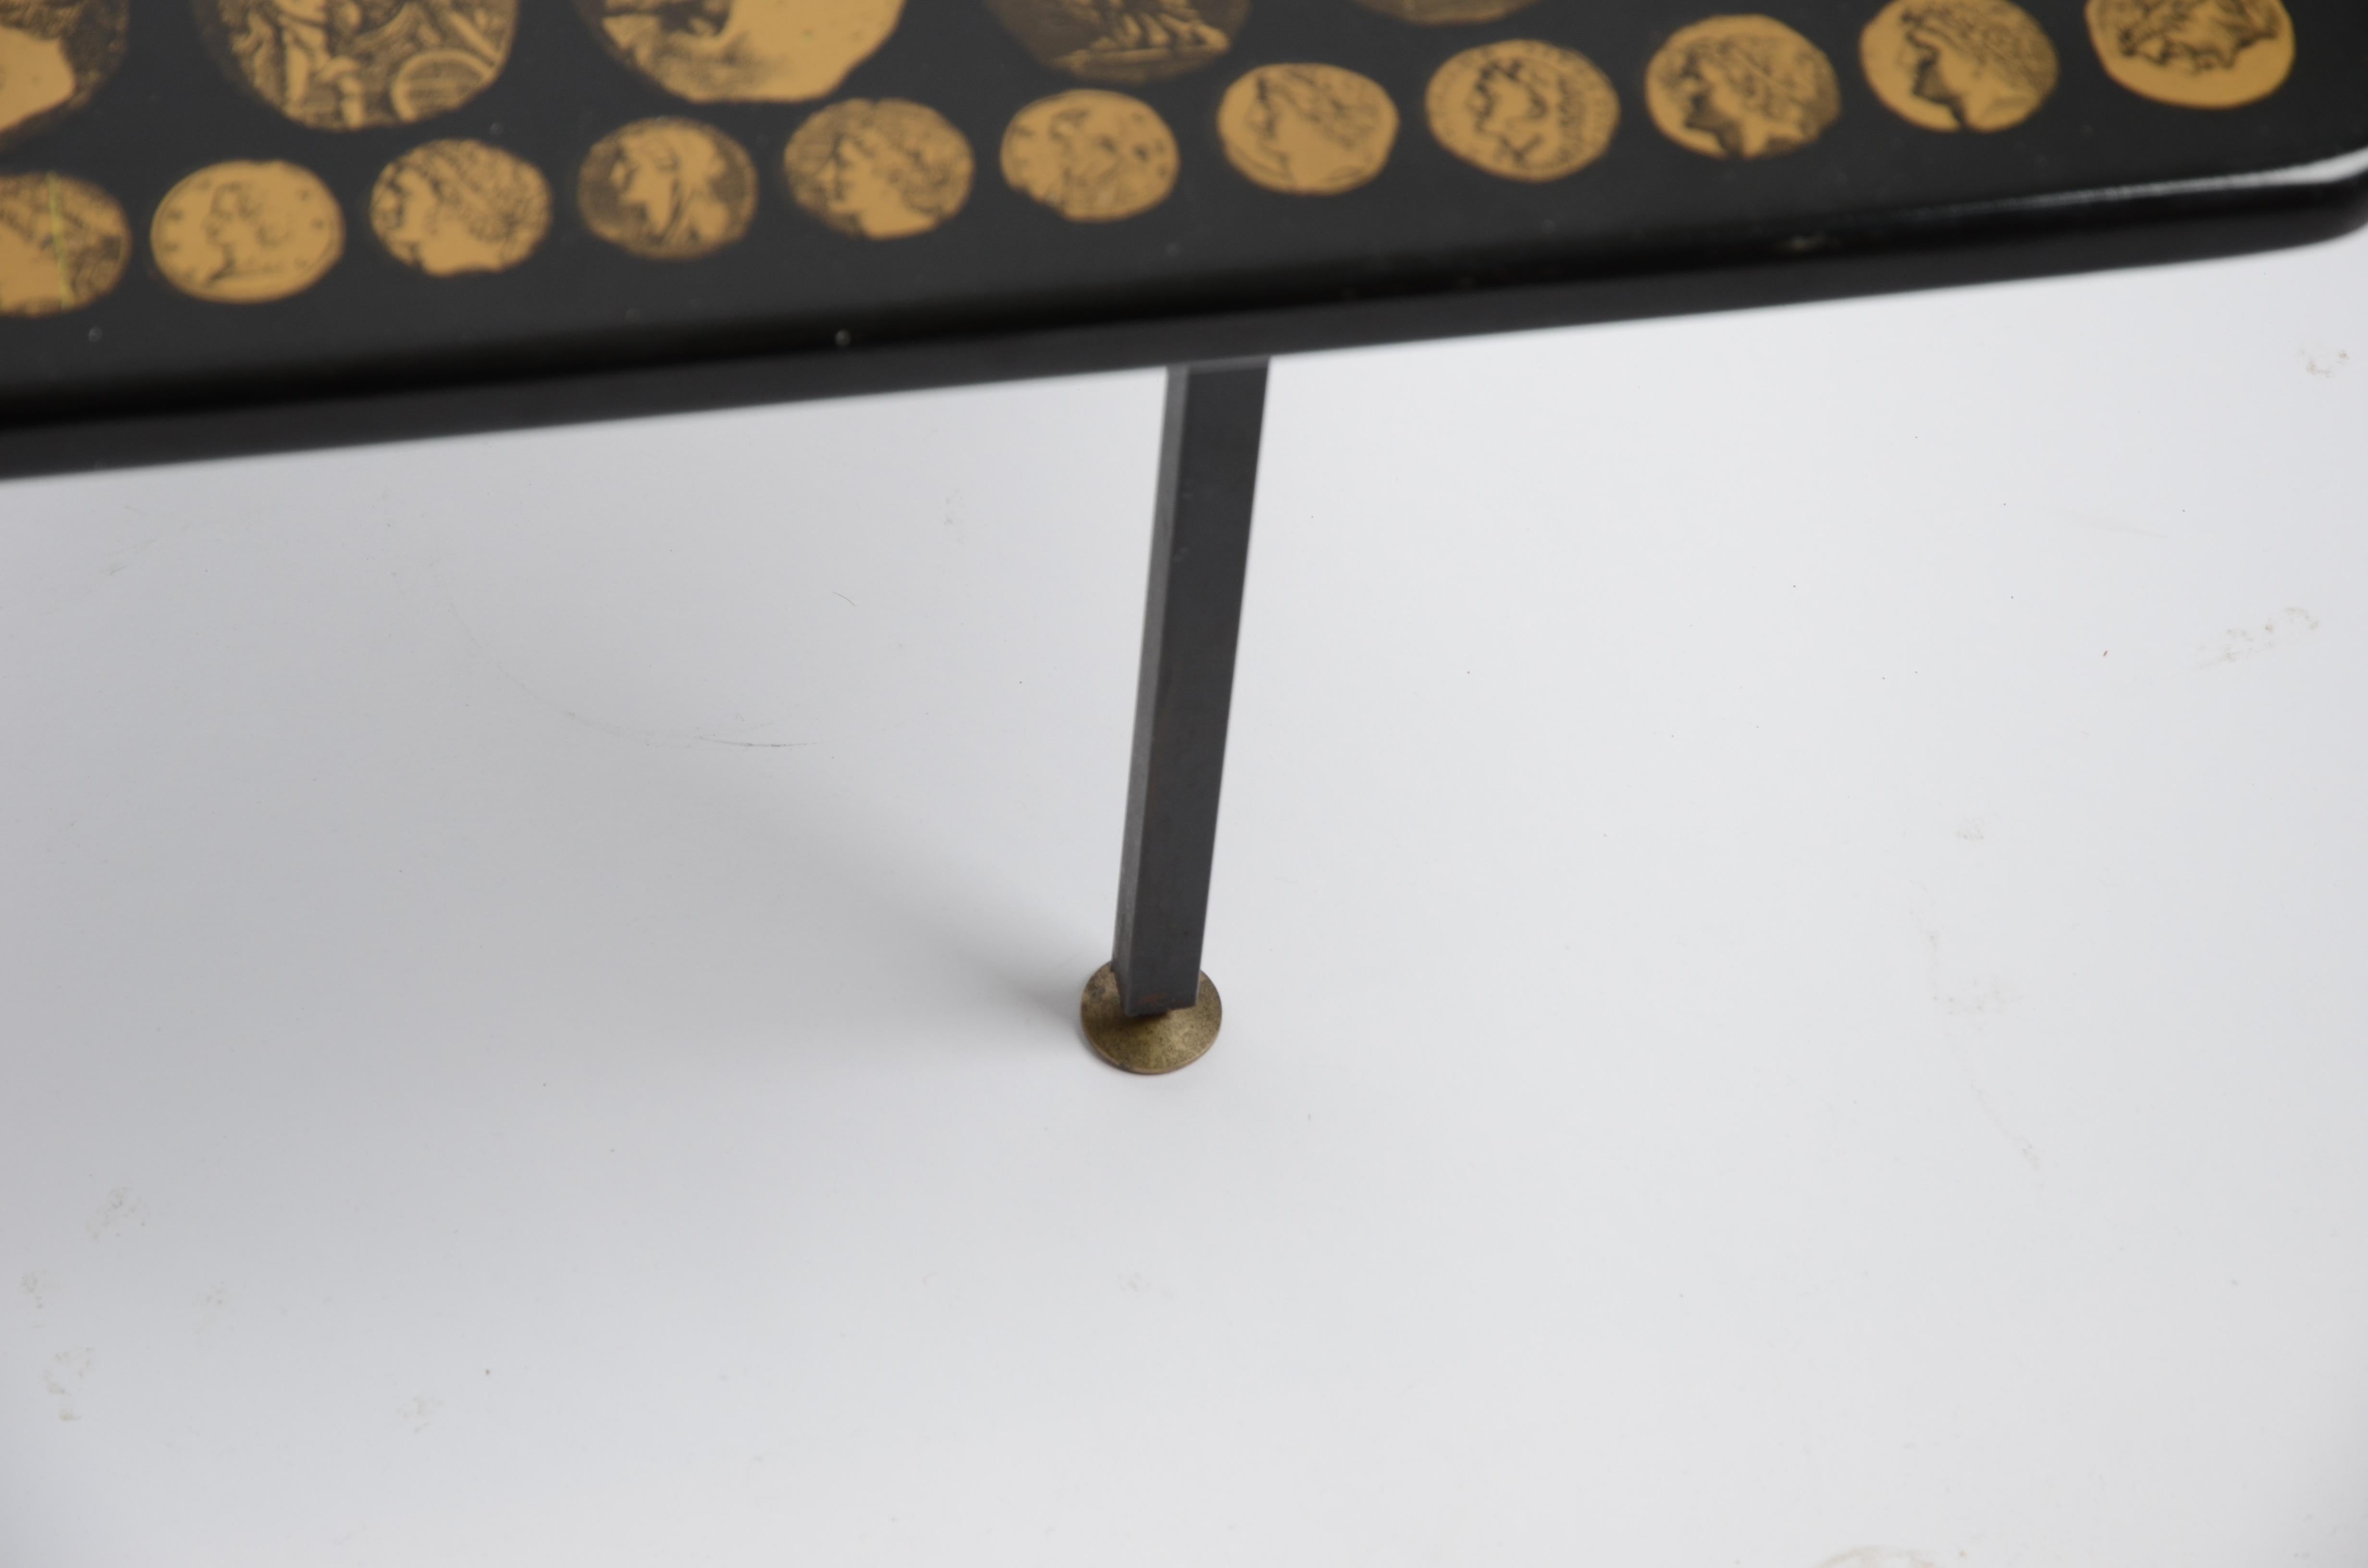 Coffee table by Italian designer Piero Fornasetti, Italy, 1960s. Top with details of Romanesque imagery/ Roman medallions. Lithographic print on lacquered wood and metal base. Manufacturer's label underneath the tabletop.